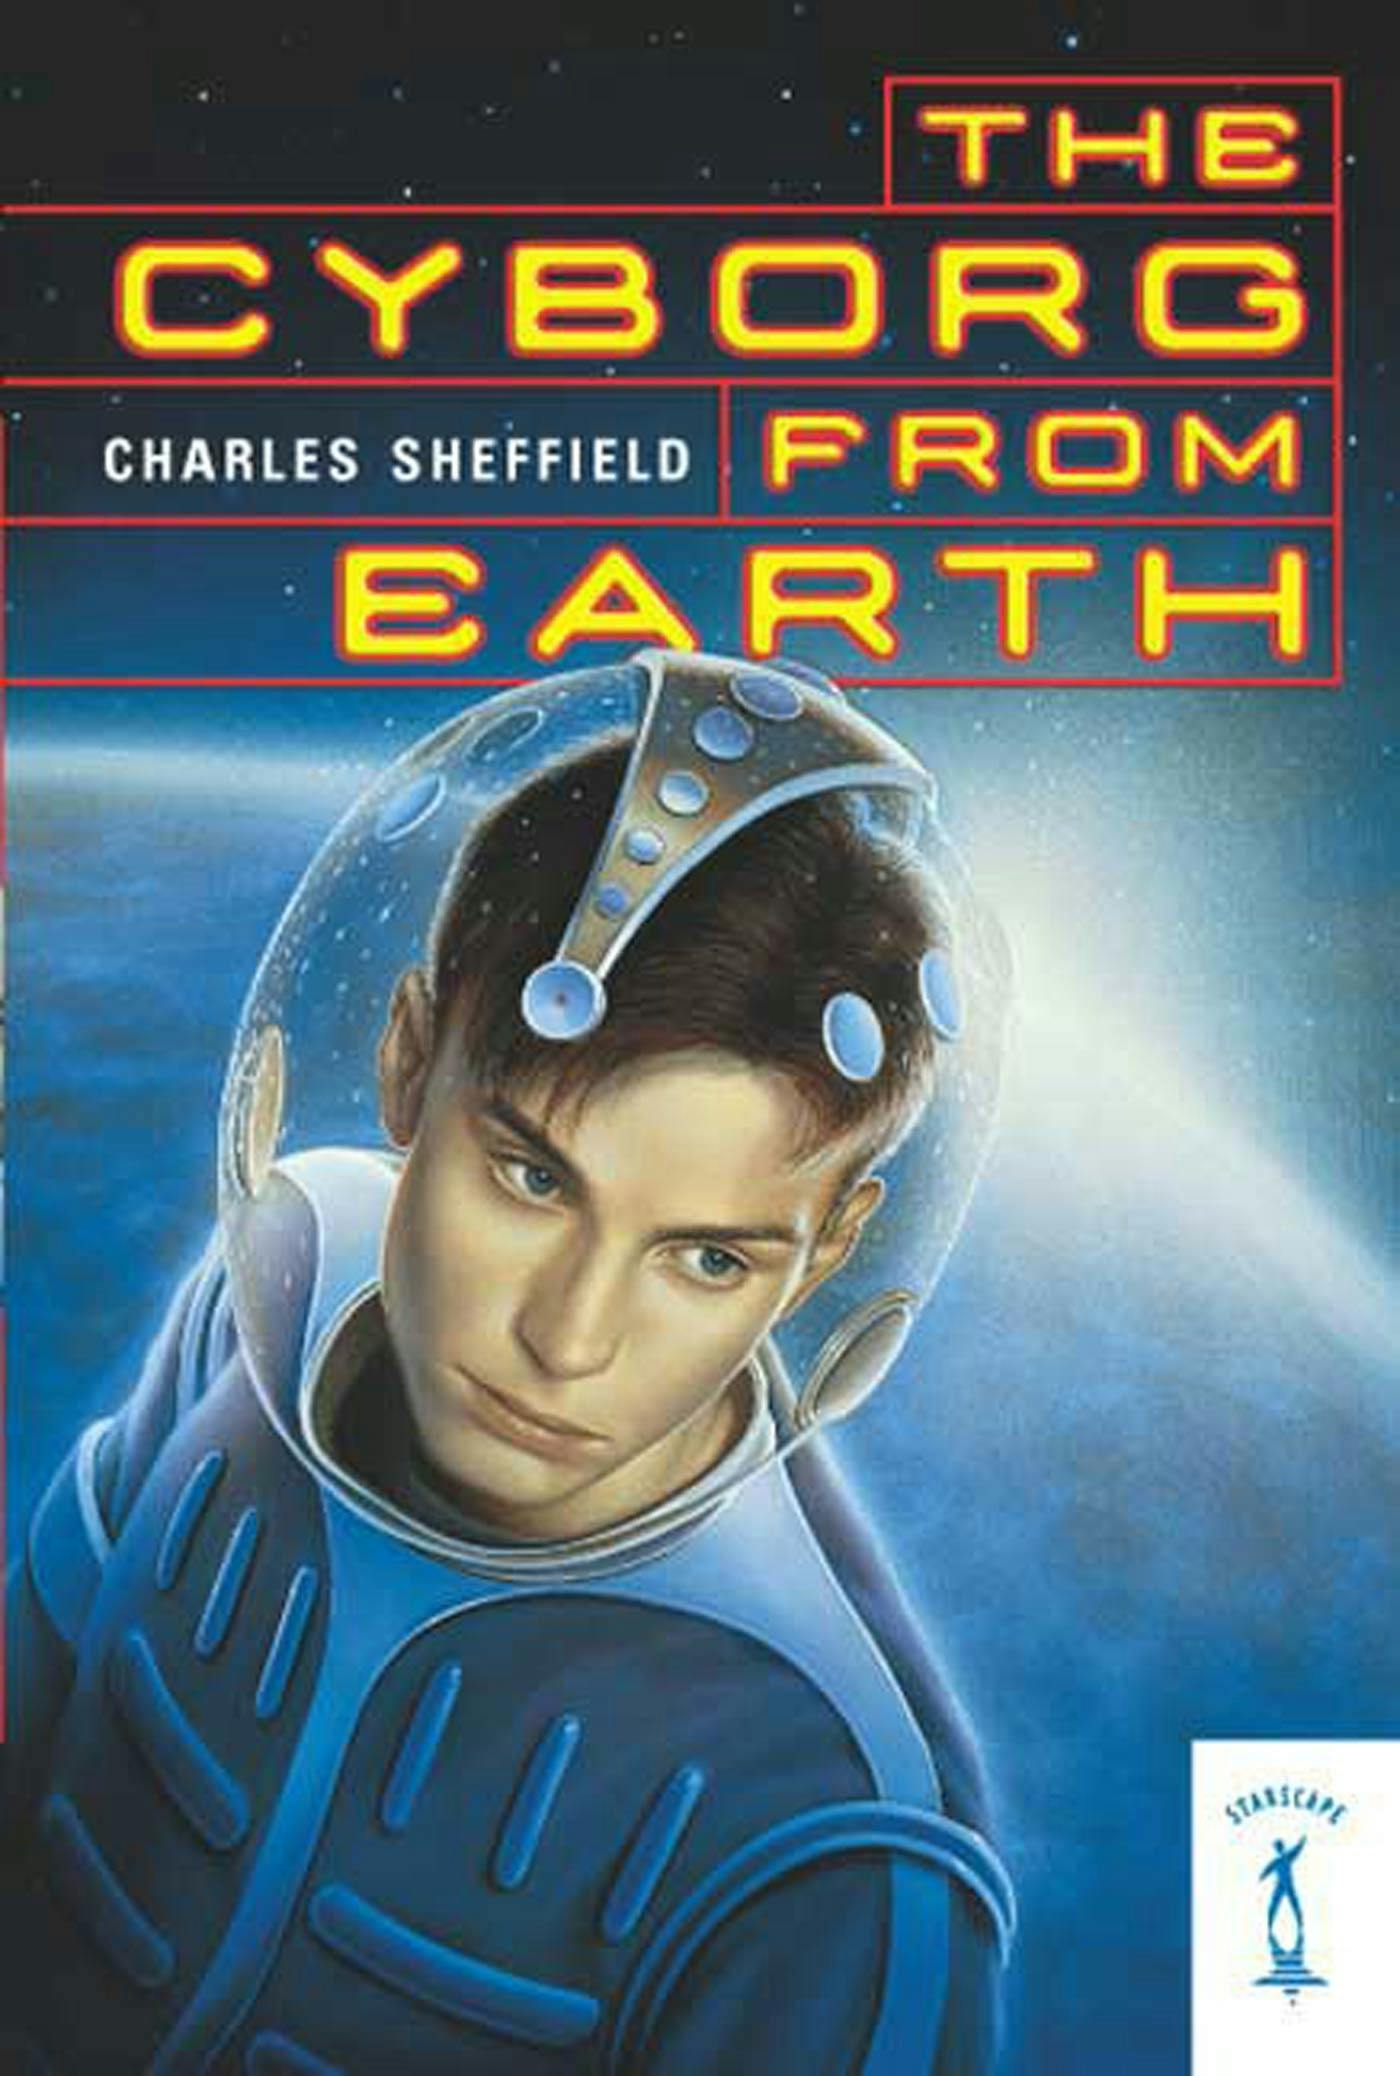 Cover for the book titled as: The Cyborg From Earth